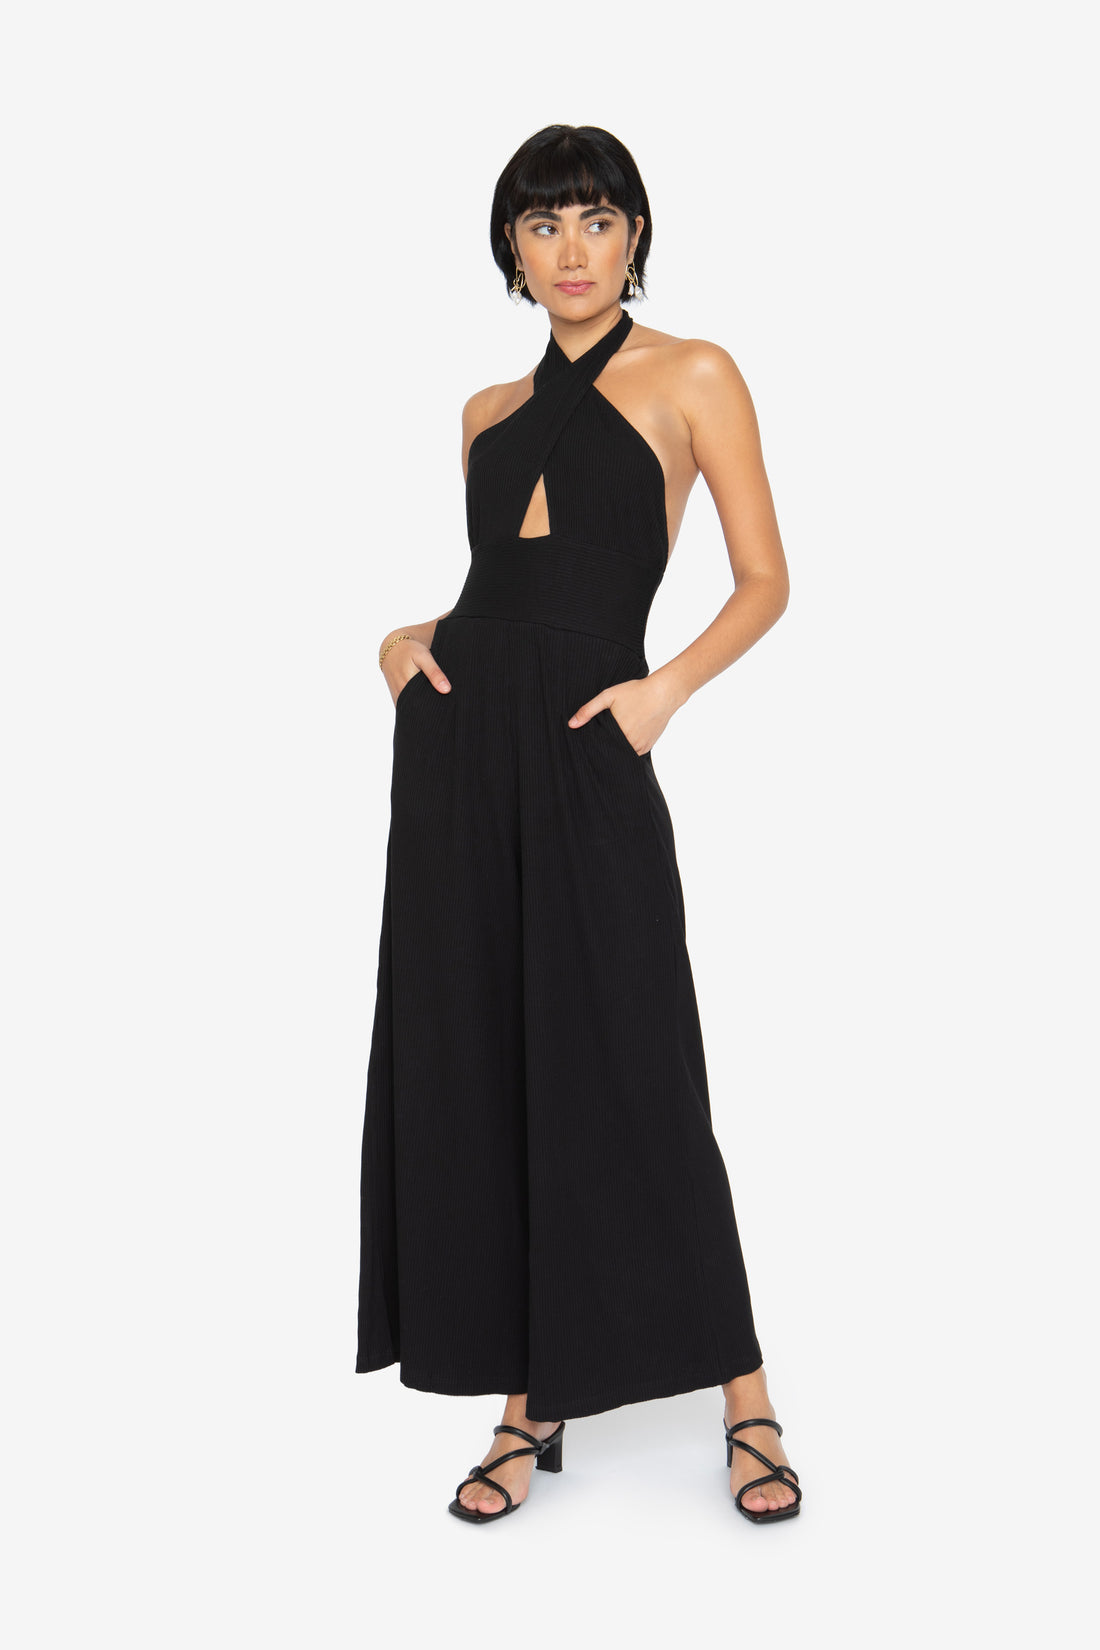 Le Fashion: 25 of the Most Stylish Black Jumpsuits for Summer